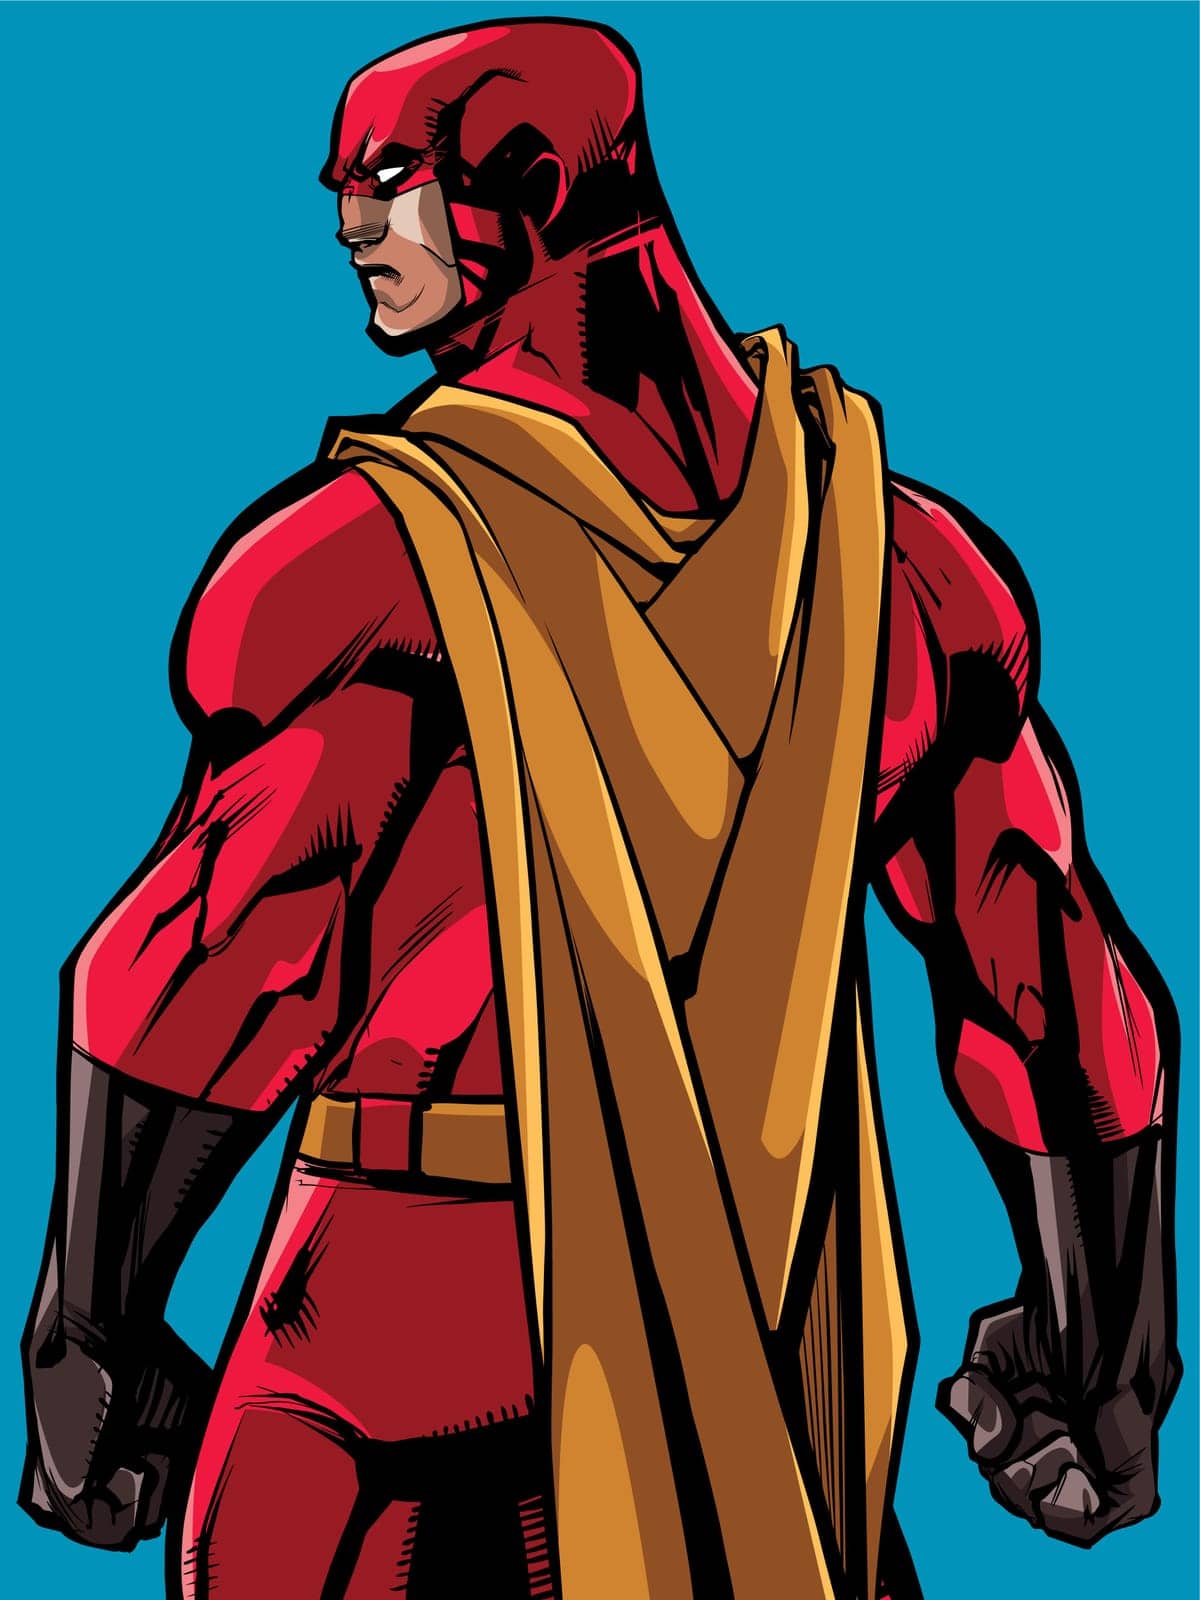 Comics style illustration of powerful superhero standing ready for battle.